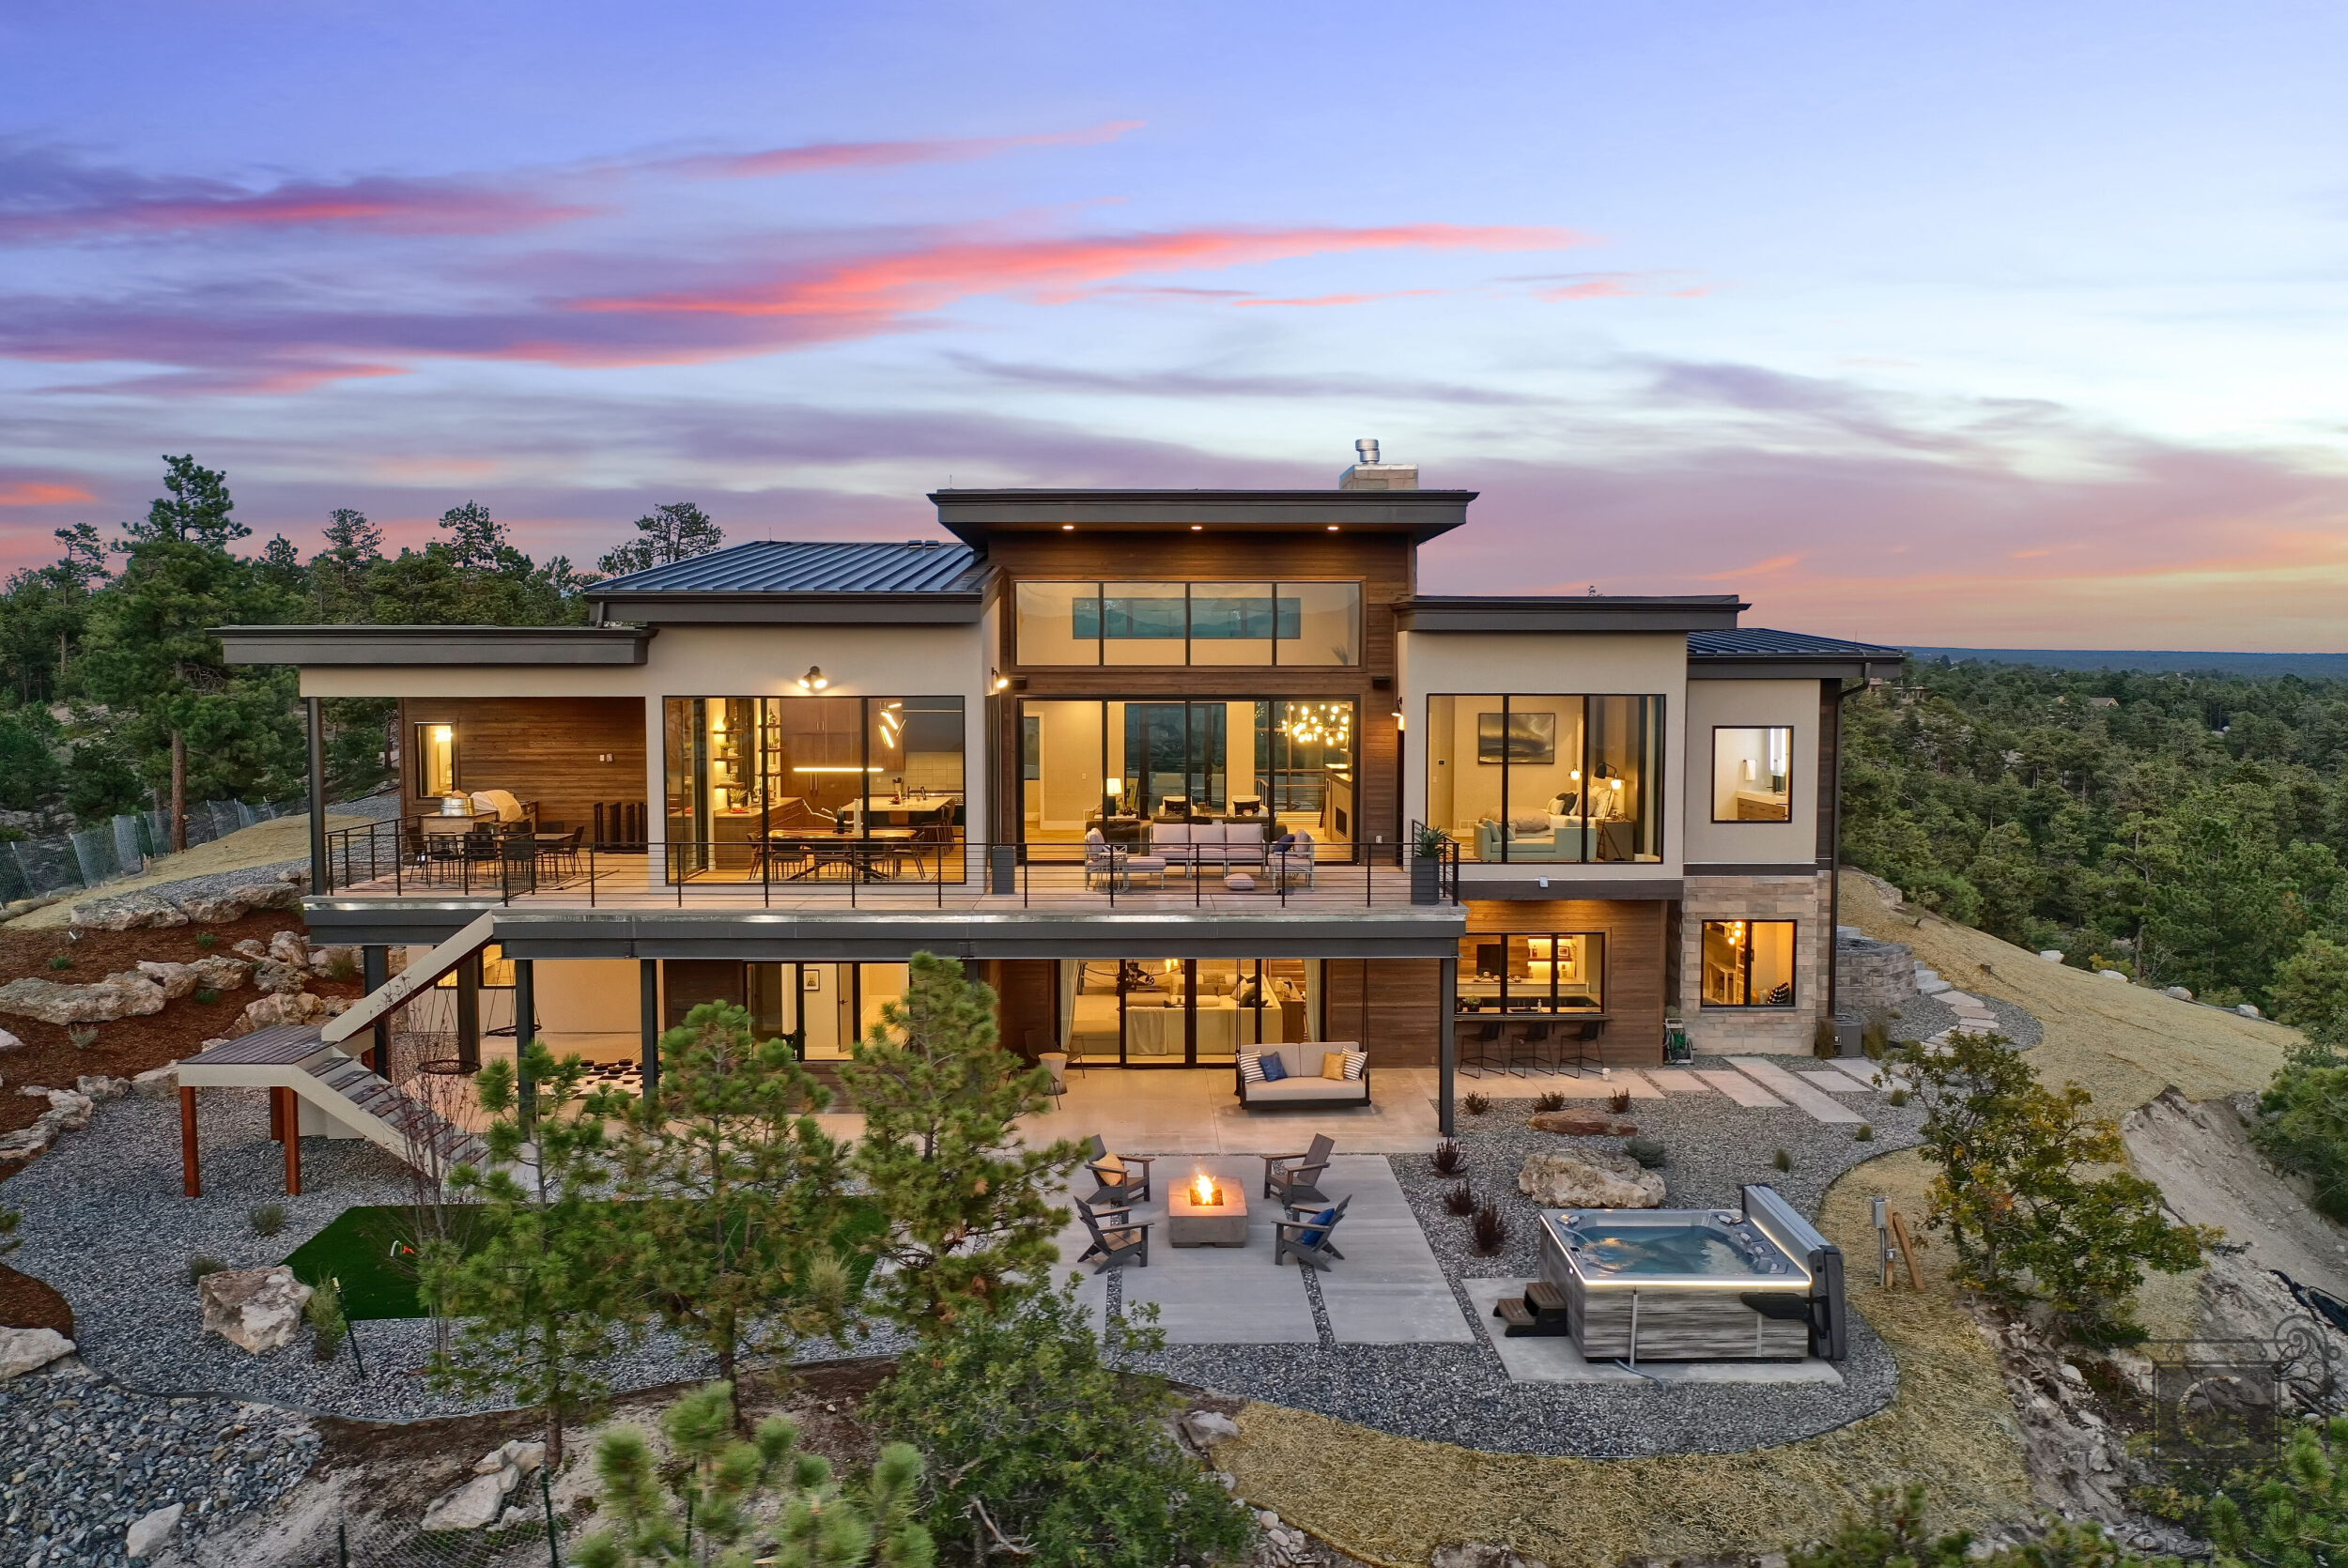 Award-Winning Luxury Home Builder Announces the Construction of One-of ...